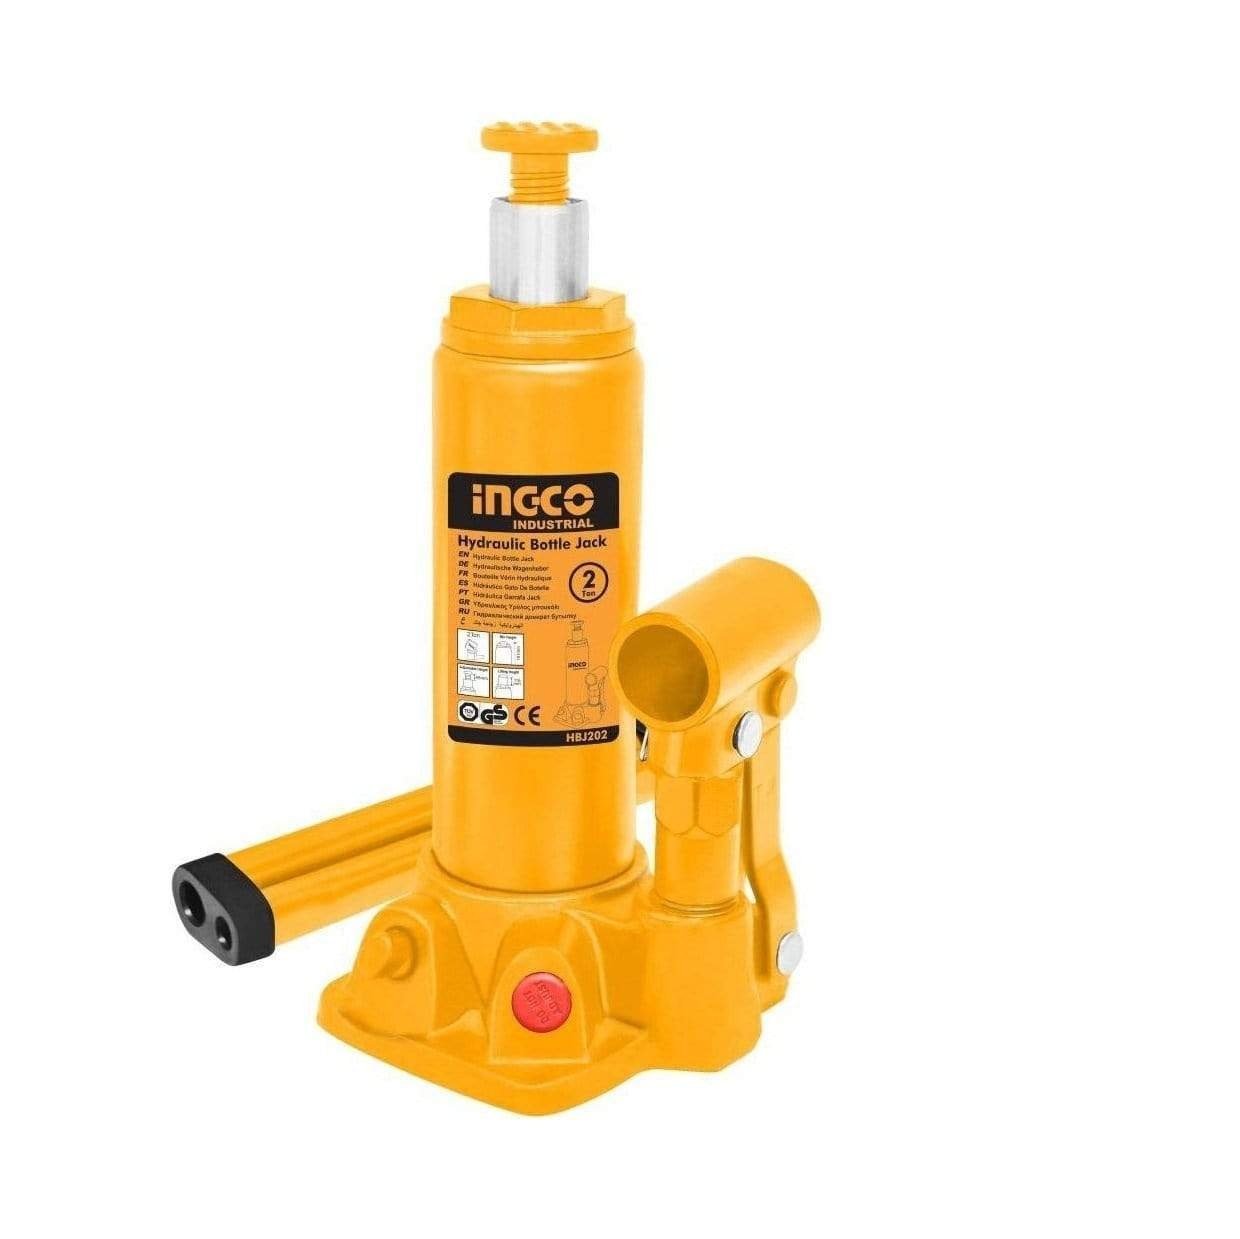 Ingco Hydraulic Bottle Jack 6 TON - HBJ602 | Shop Online in Accra, Ghana - Supply Master Towing and Lifting Buy Tools hardware Building materials